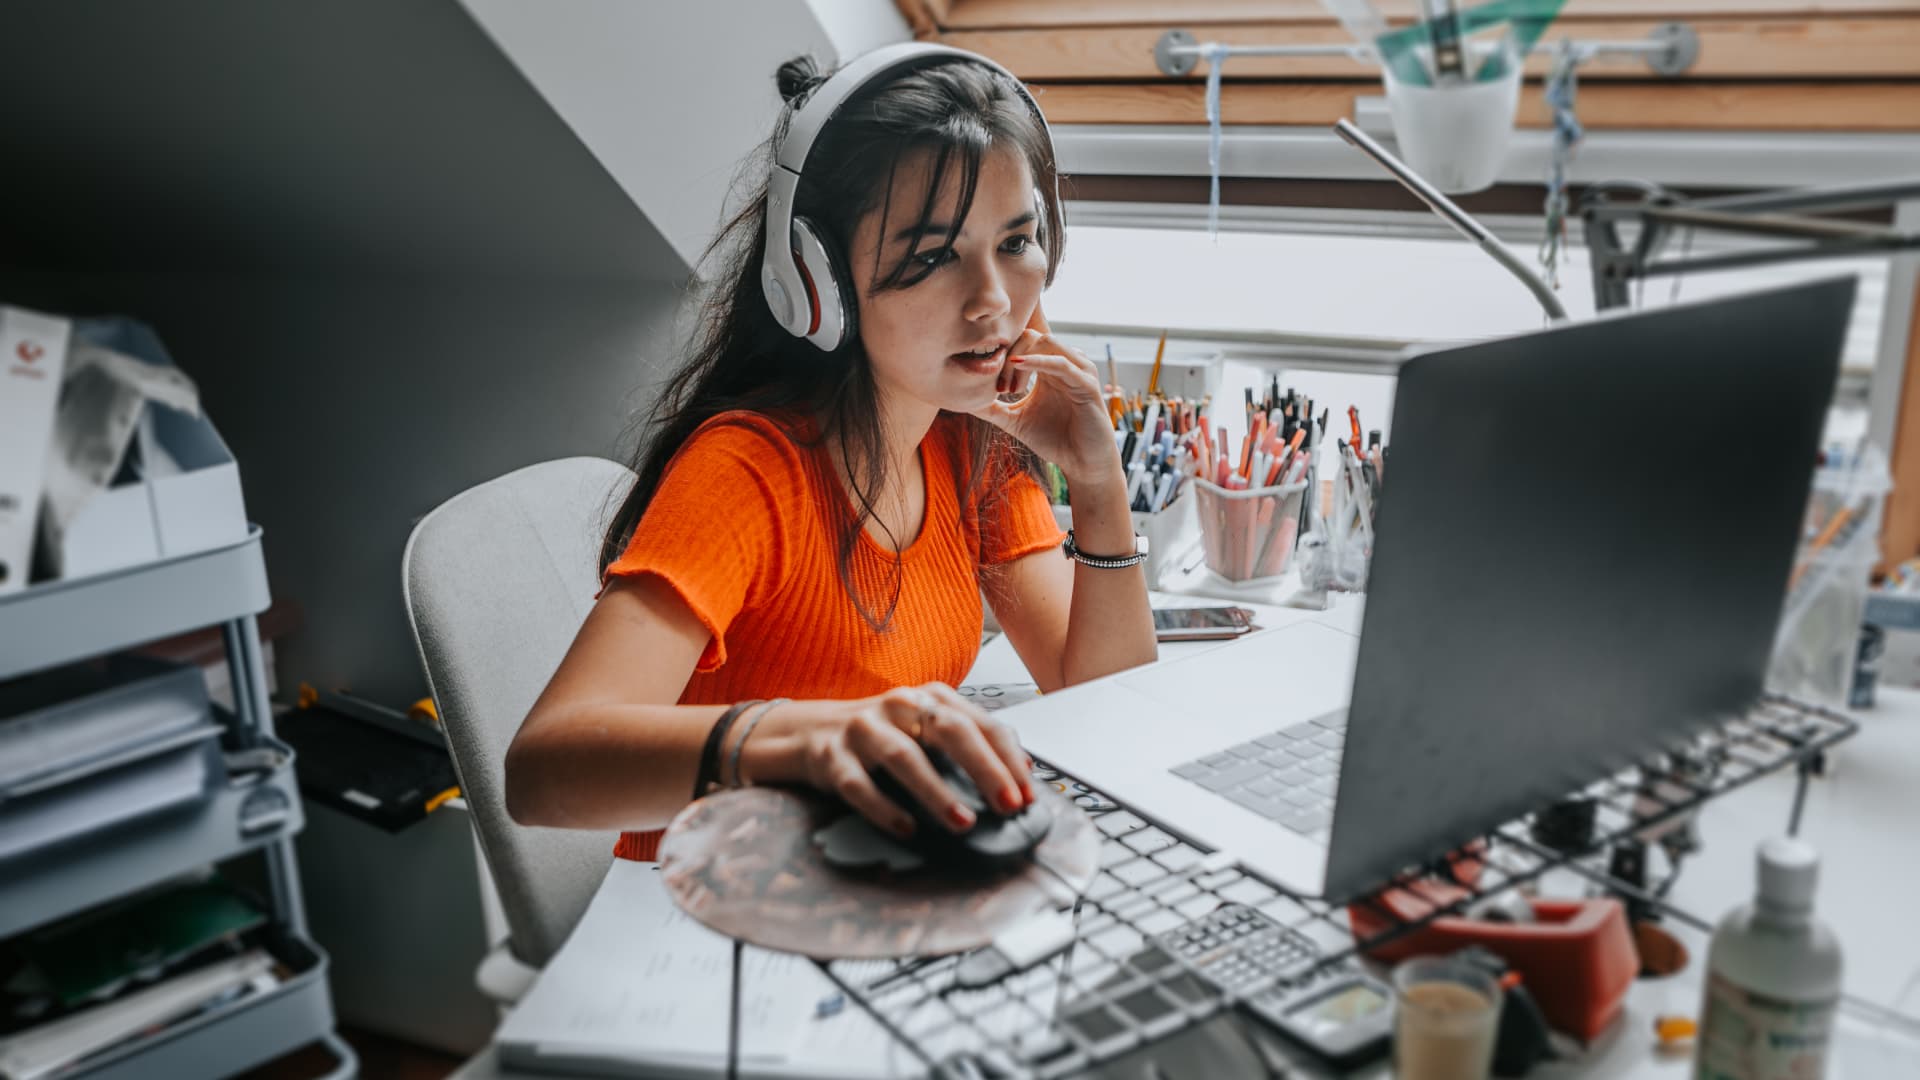 According to Microsoft, younger generations are the most likely to aspire to be their own boss — 76% of Gen Z and millennials said that's a goal, compared with 63% of those who are Gen X and older.